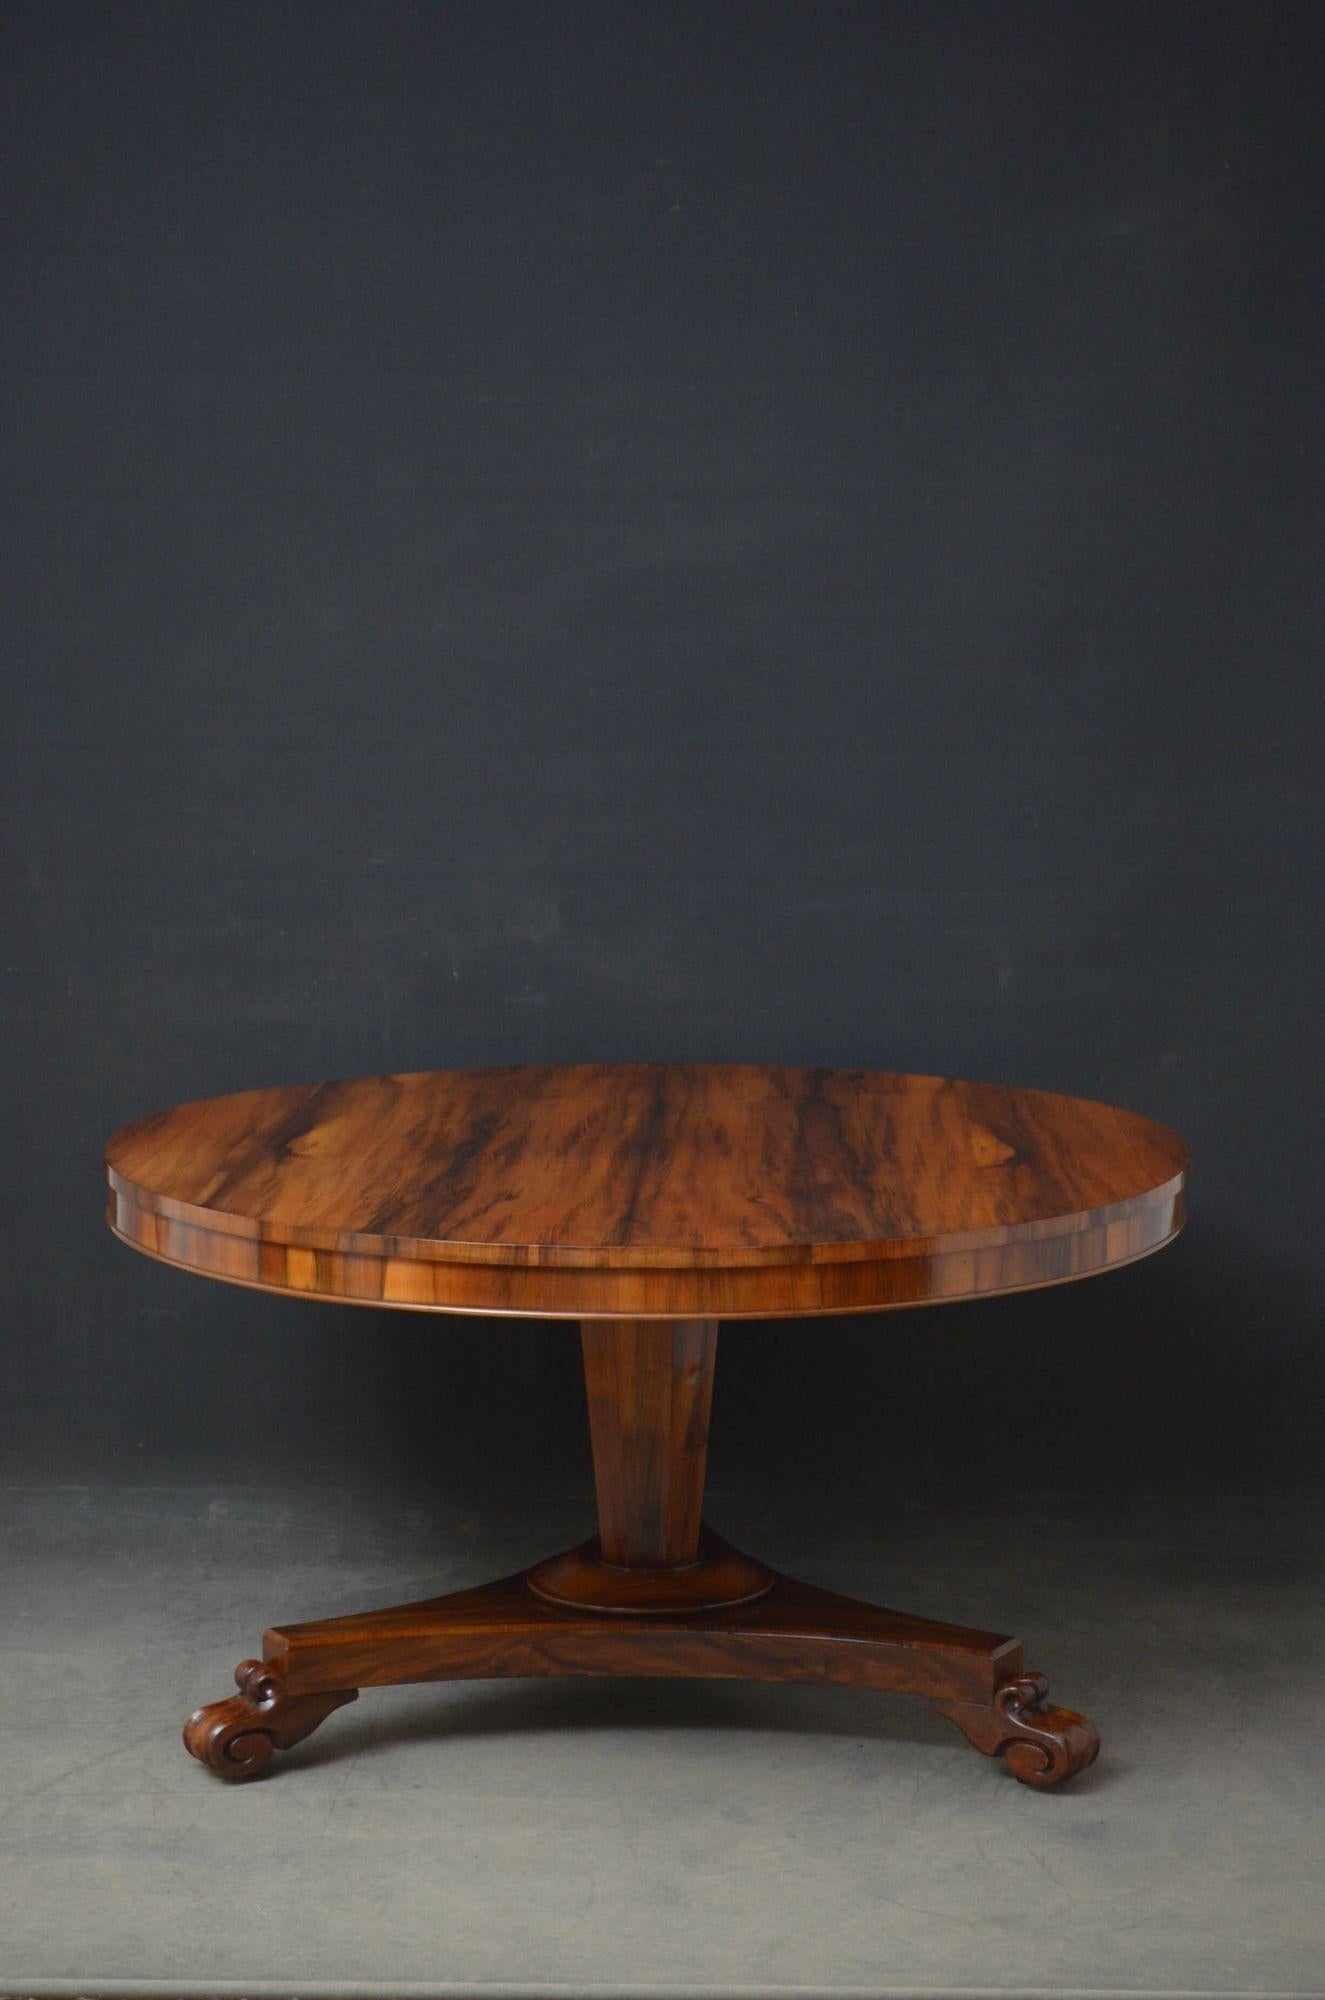 Sn5247 fine quality and rare William IV goncalo alves dining table, having circular top with outstanding contrasting grain above shallow frieze, standing on tapered, flat faceted column terminating in trefoil base, paw feet and castors. This antique